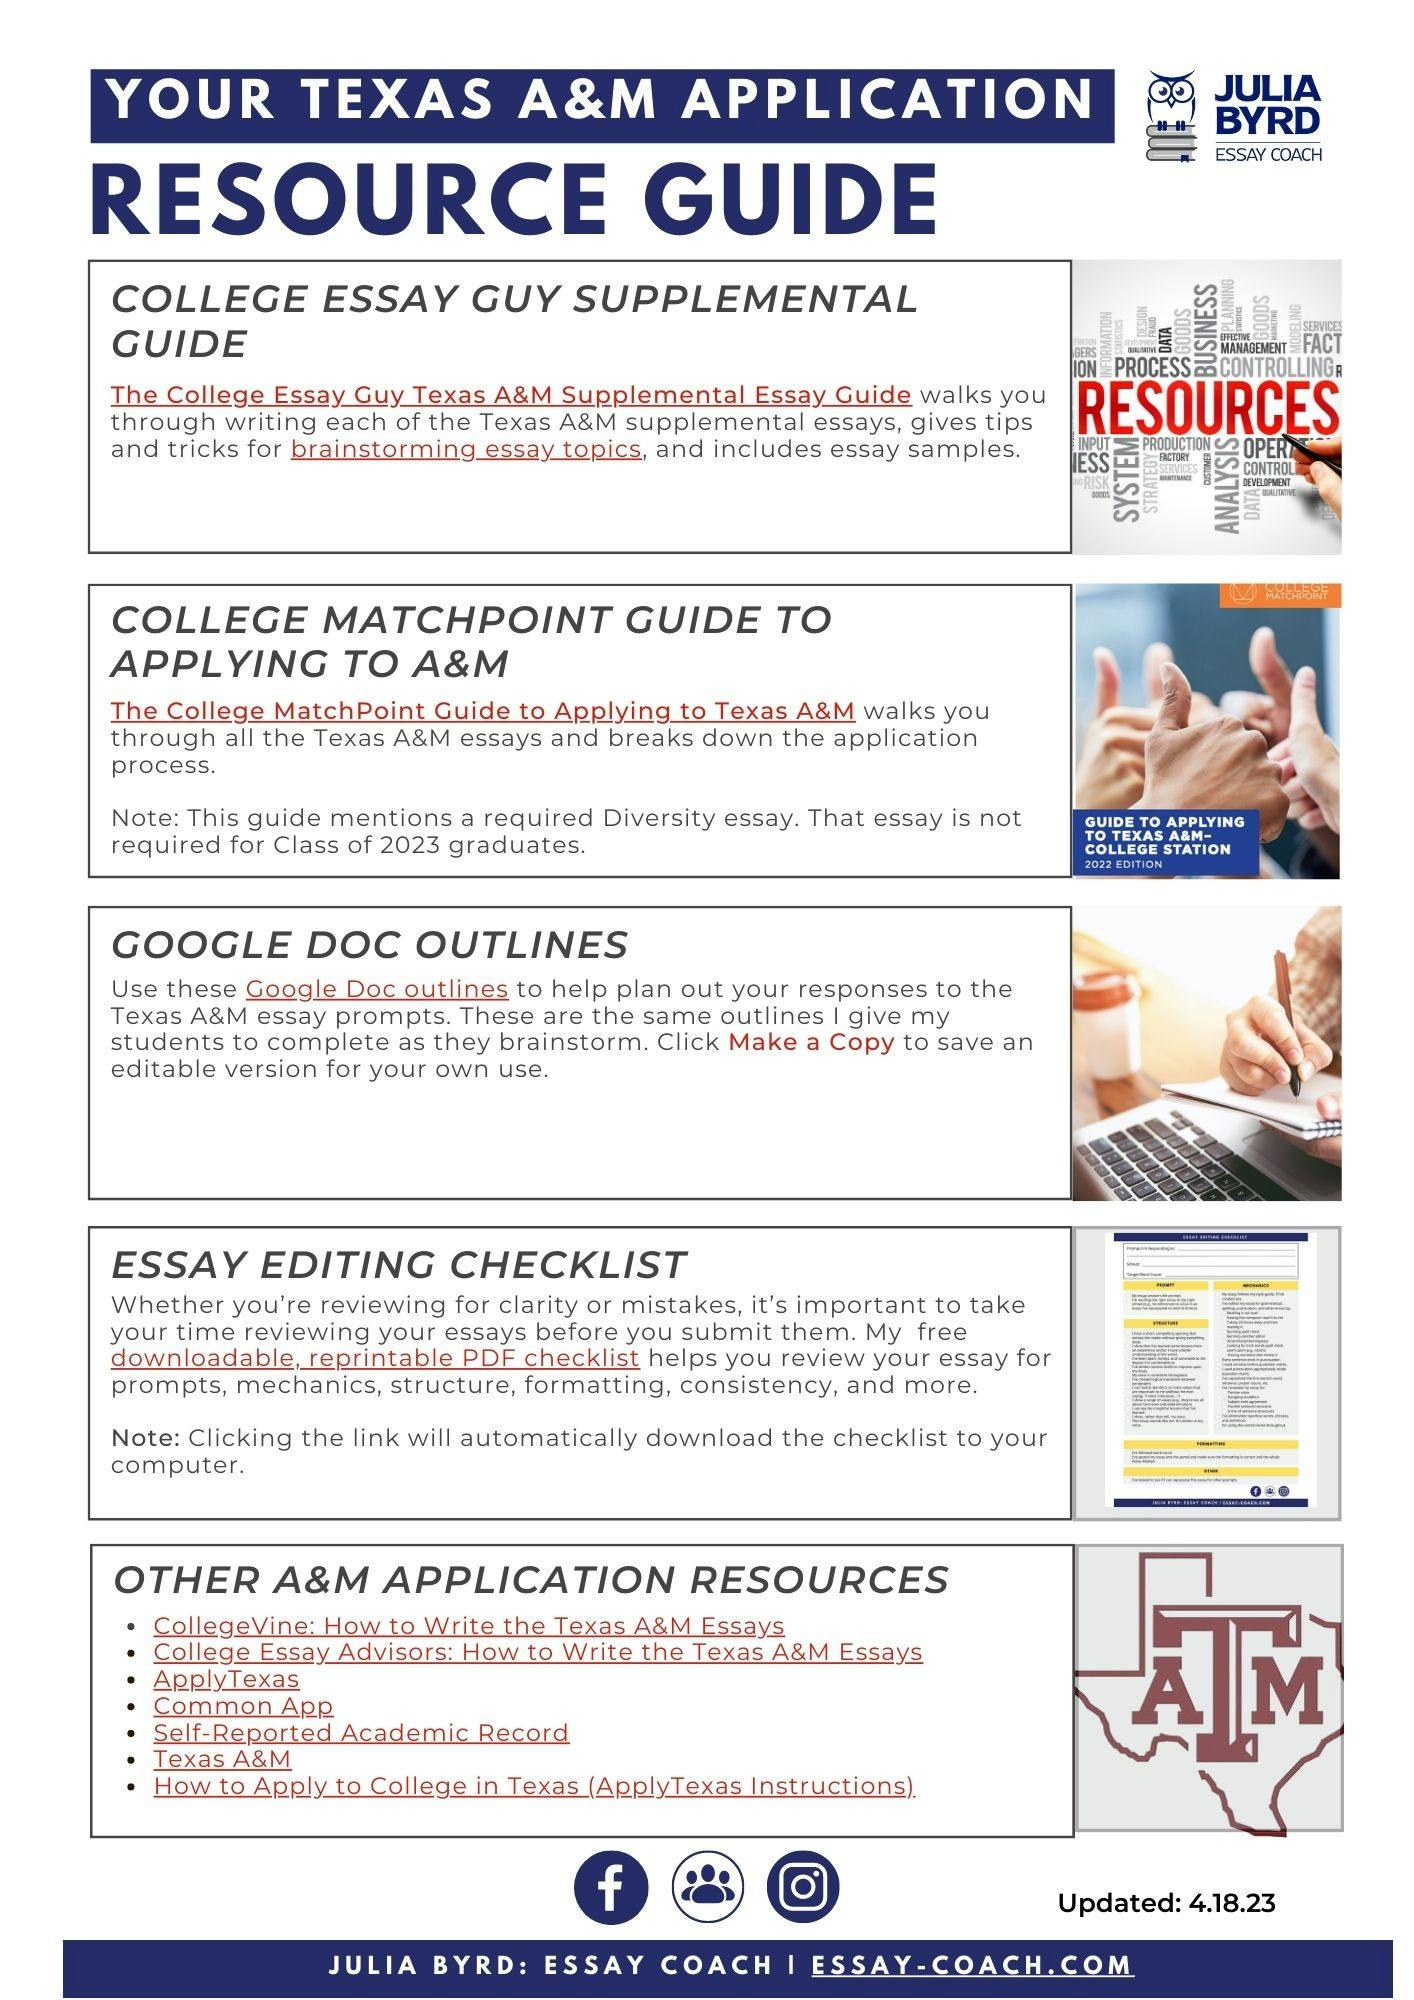 Get your free Texas A&M Applicant Resource Guide